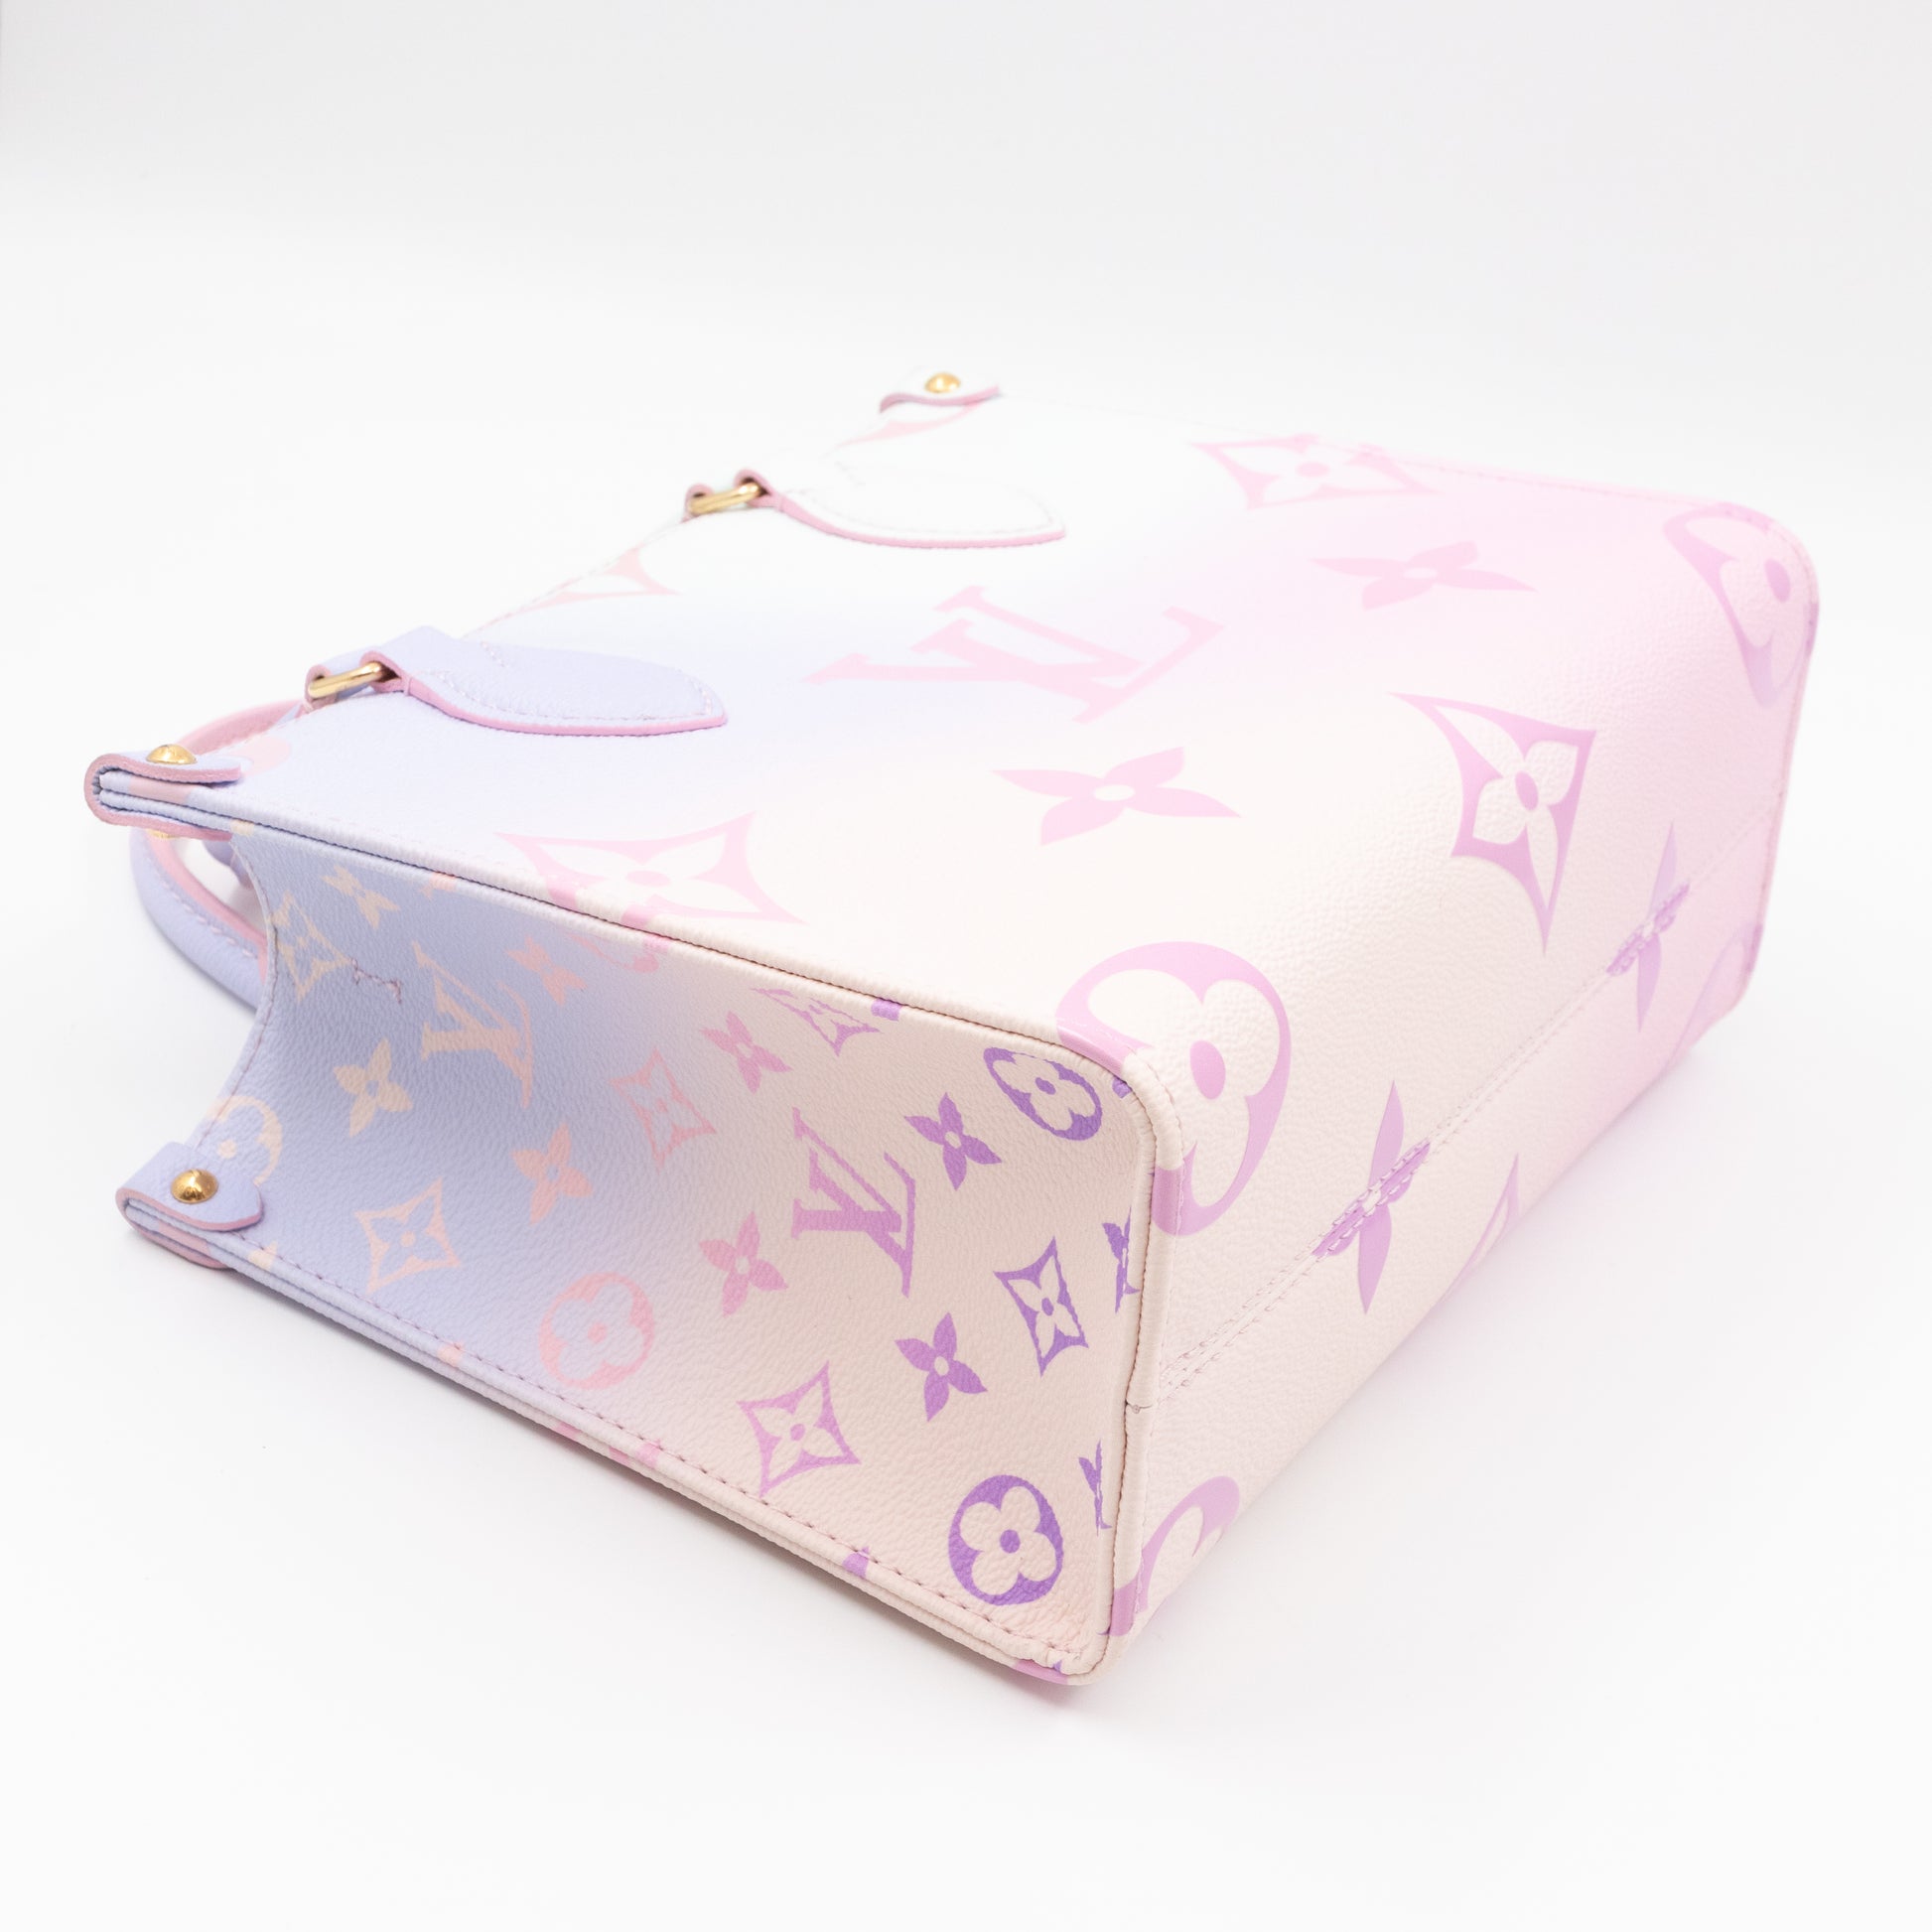 LOUIS VUITTON Monogram Giant Spring In The City Onthego PM Sunrise Pastel  1207577